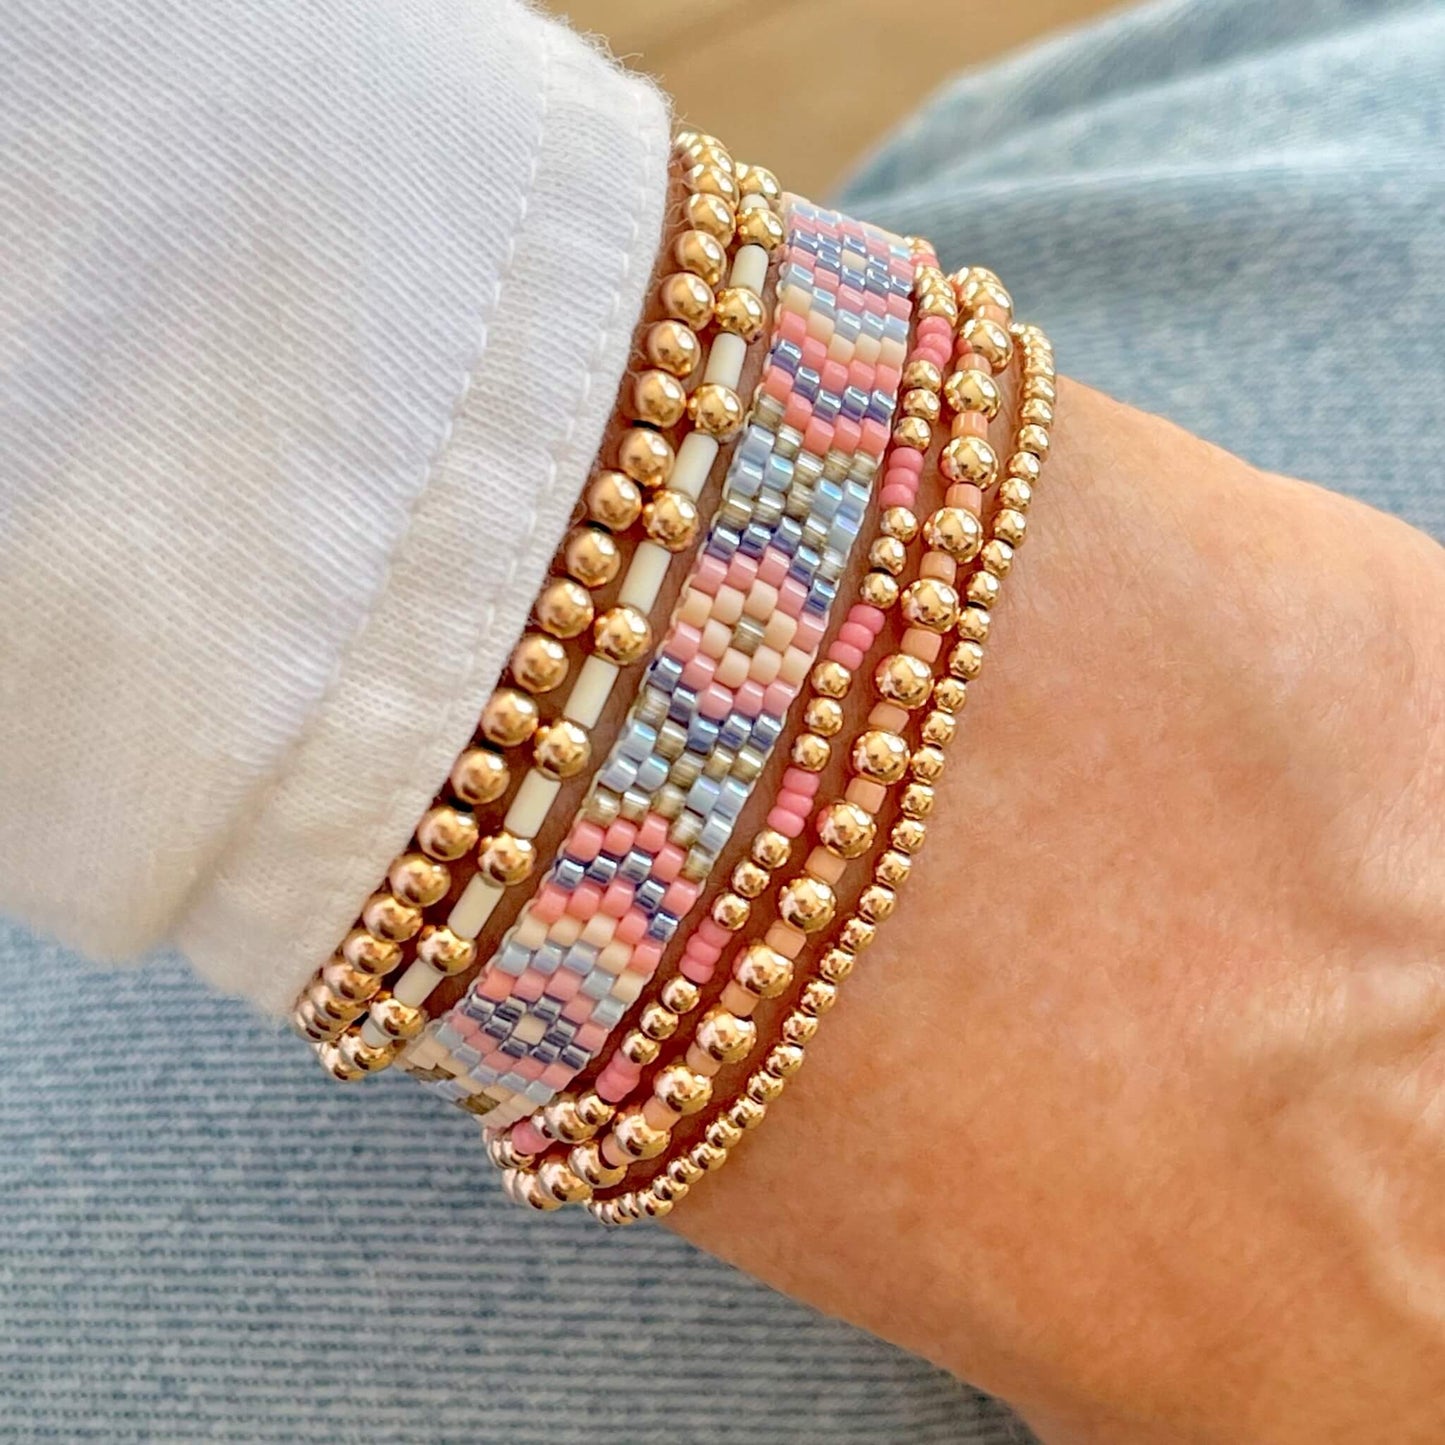 Pink, peach, blue, and ivory beaded bracelet stack with 5 gold filled stretch bracelets and a thin woven arrow cuff band.